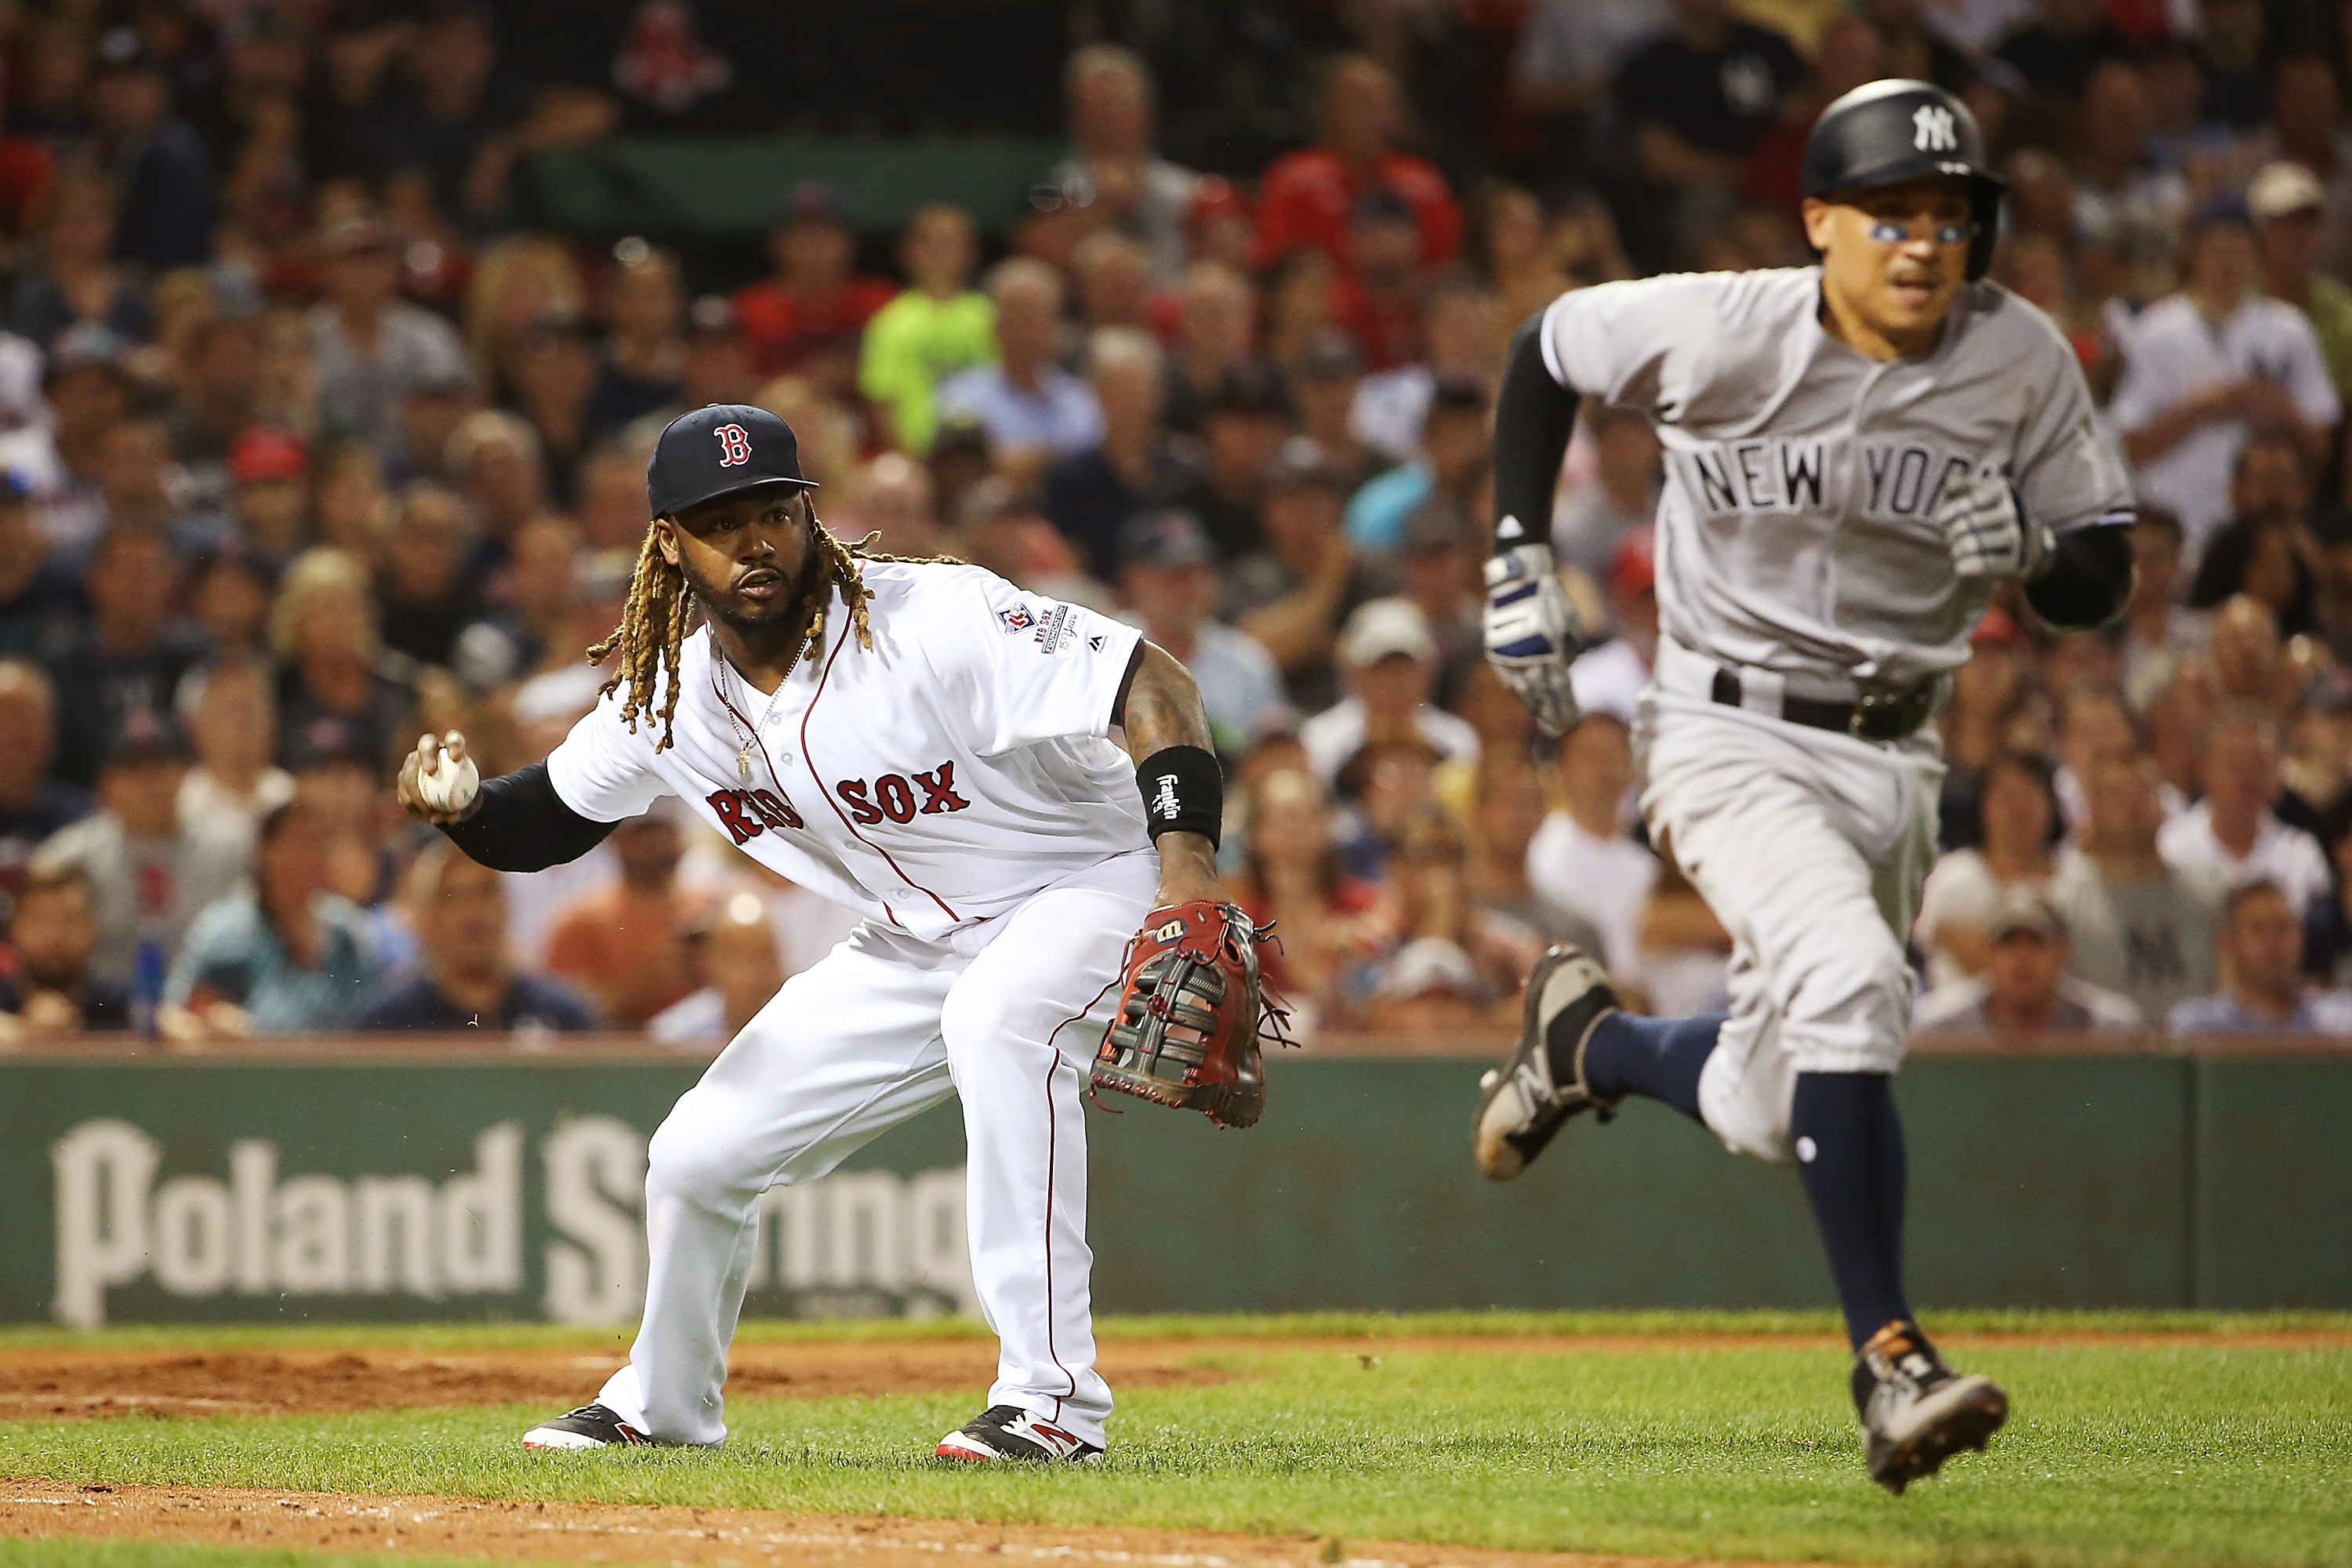 New York Yankees Red Sox caught stealing signs using Apple Watch